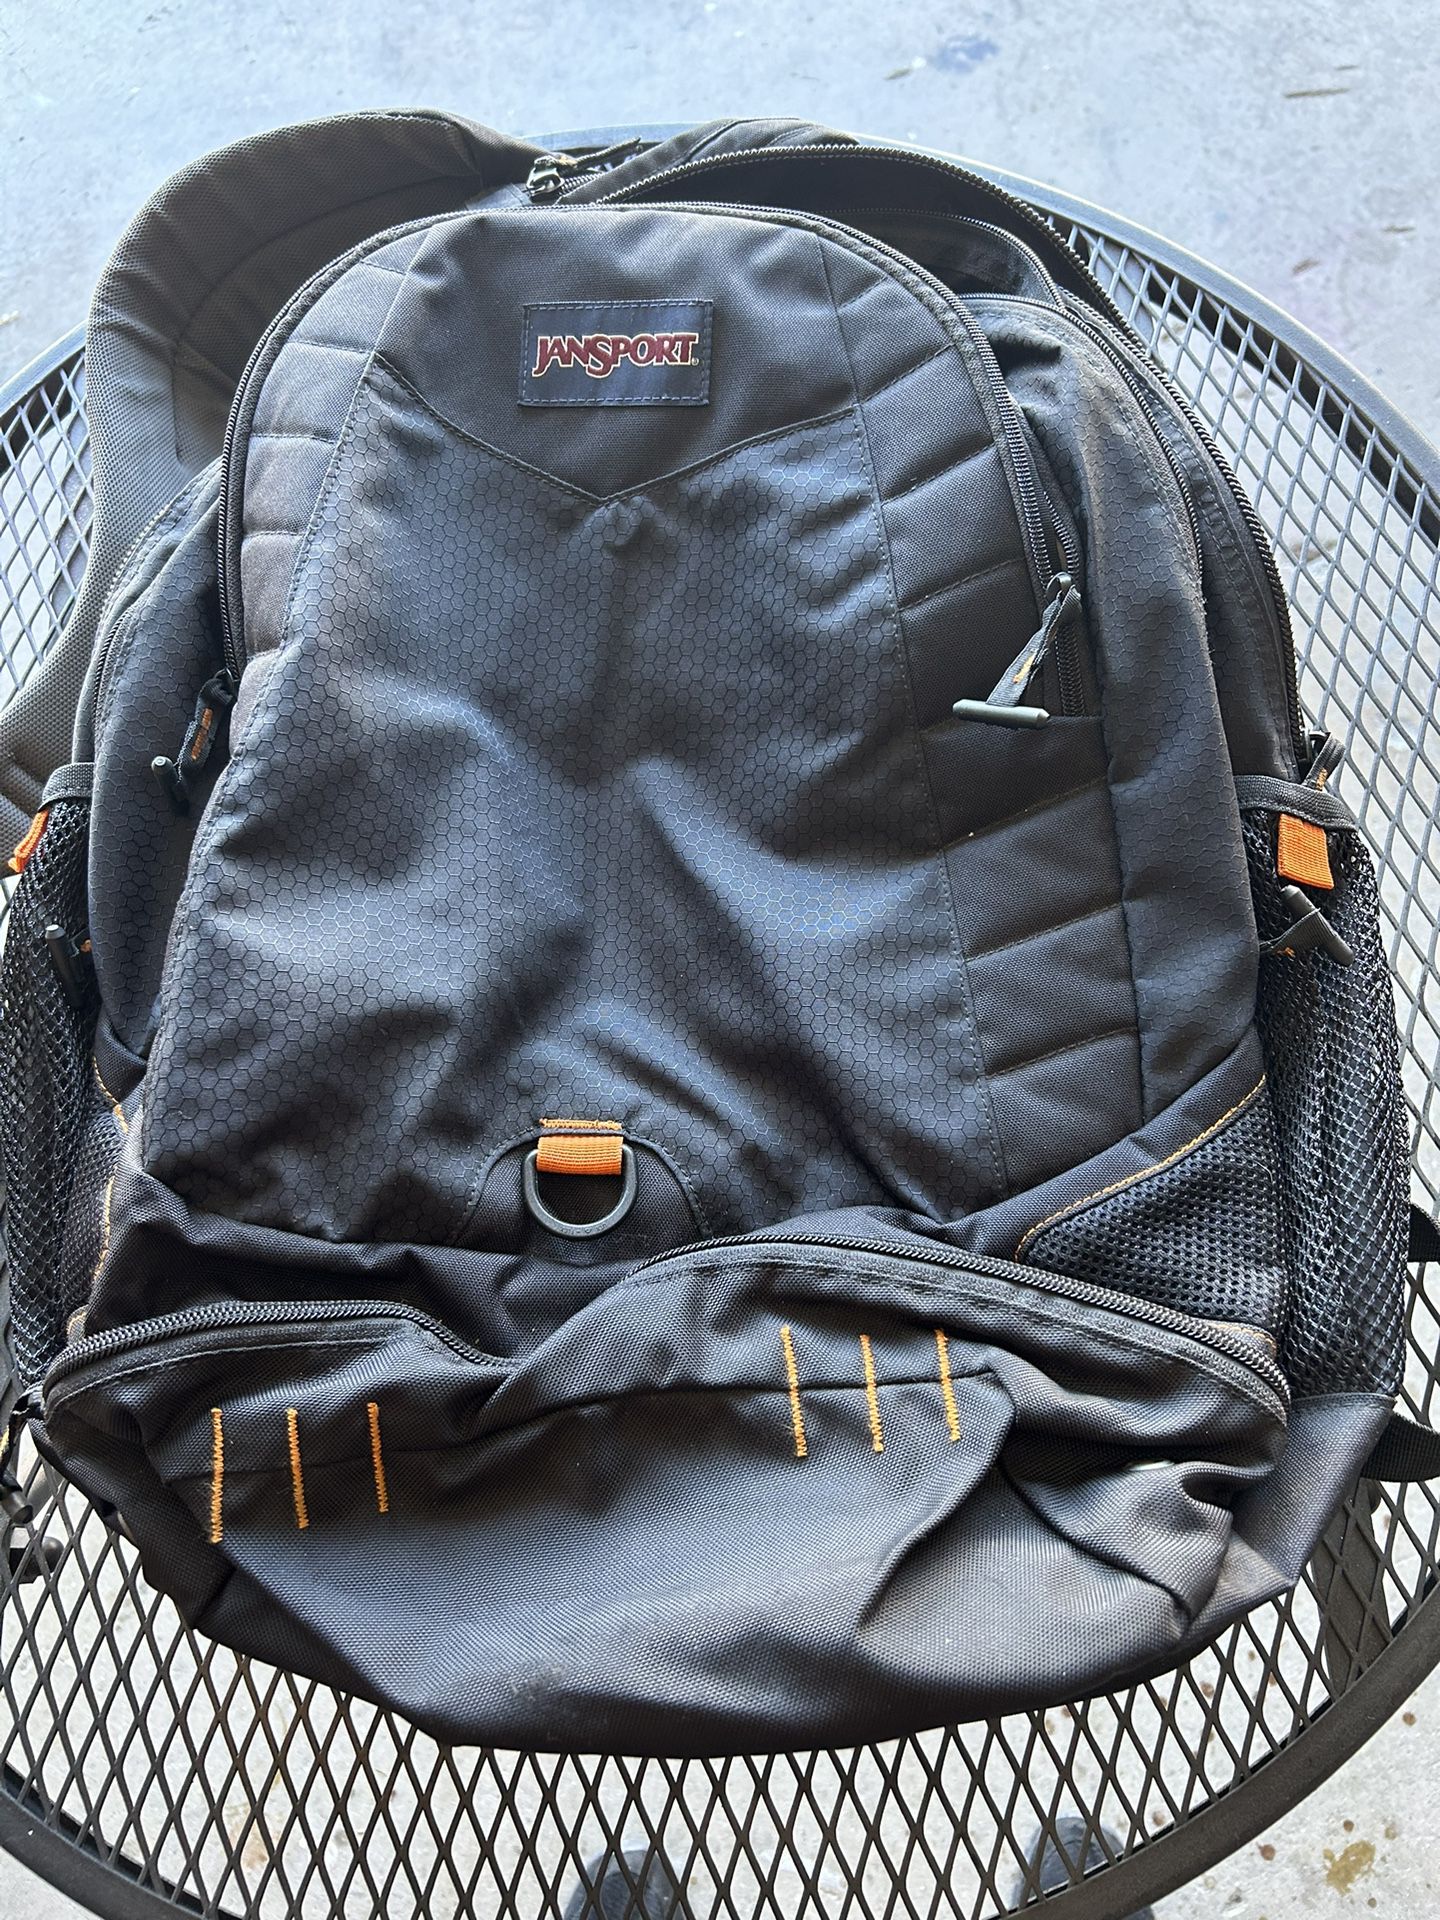 Jansport Backpack Space For Computer. Used A Couple Times 2 Mesh Bottle Holders Storage In Bottom Also 